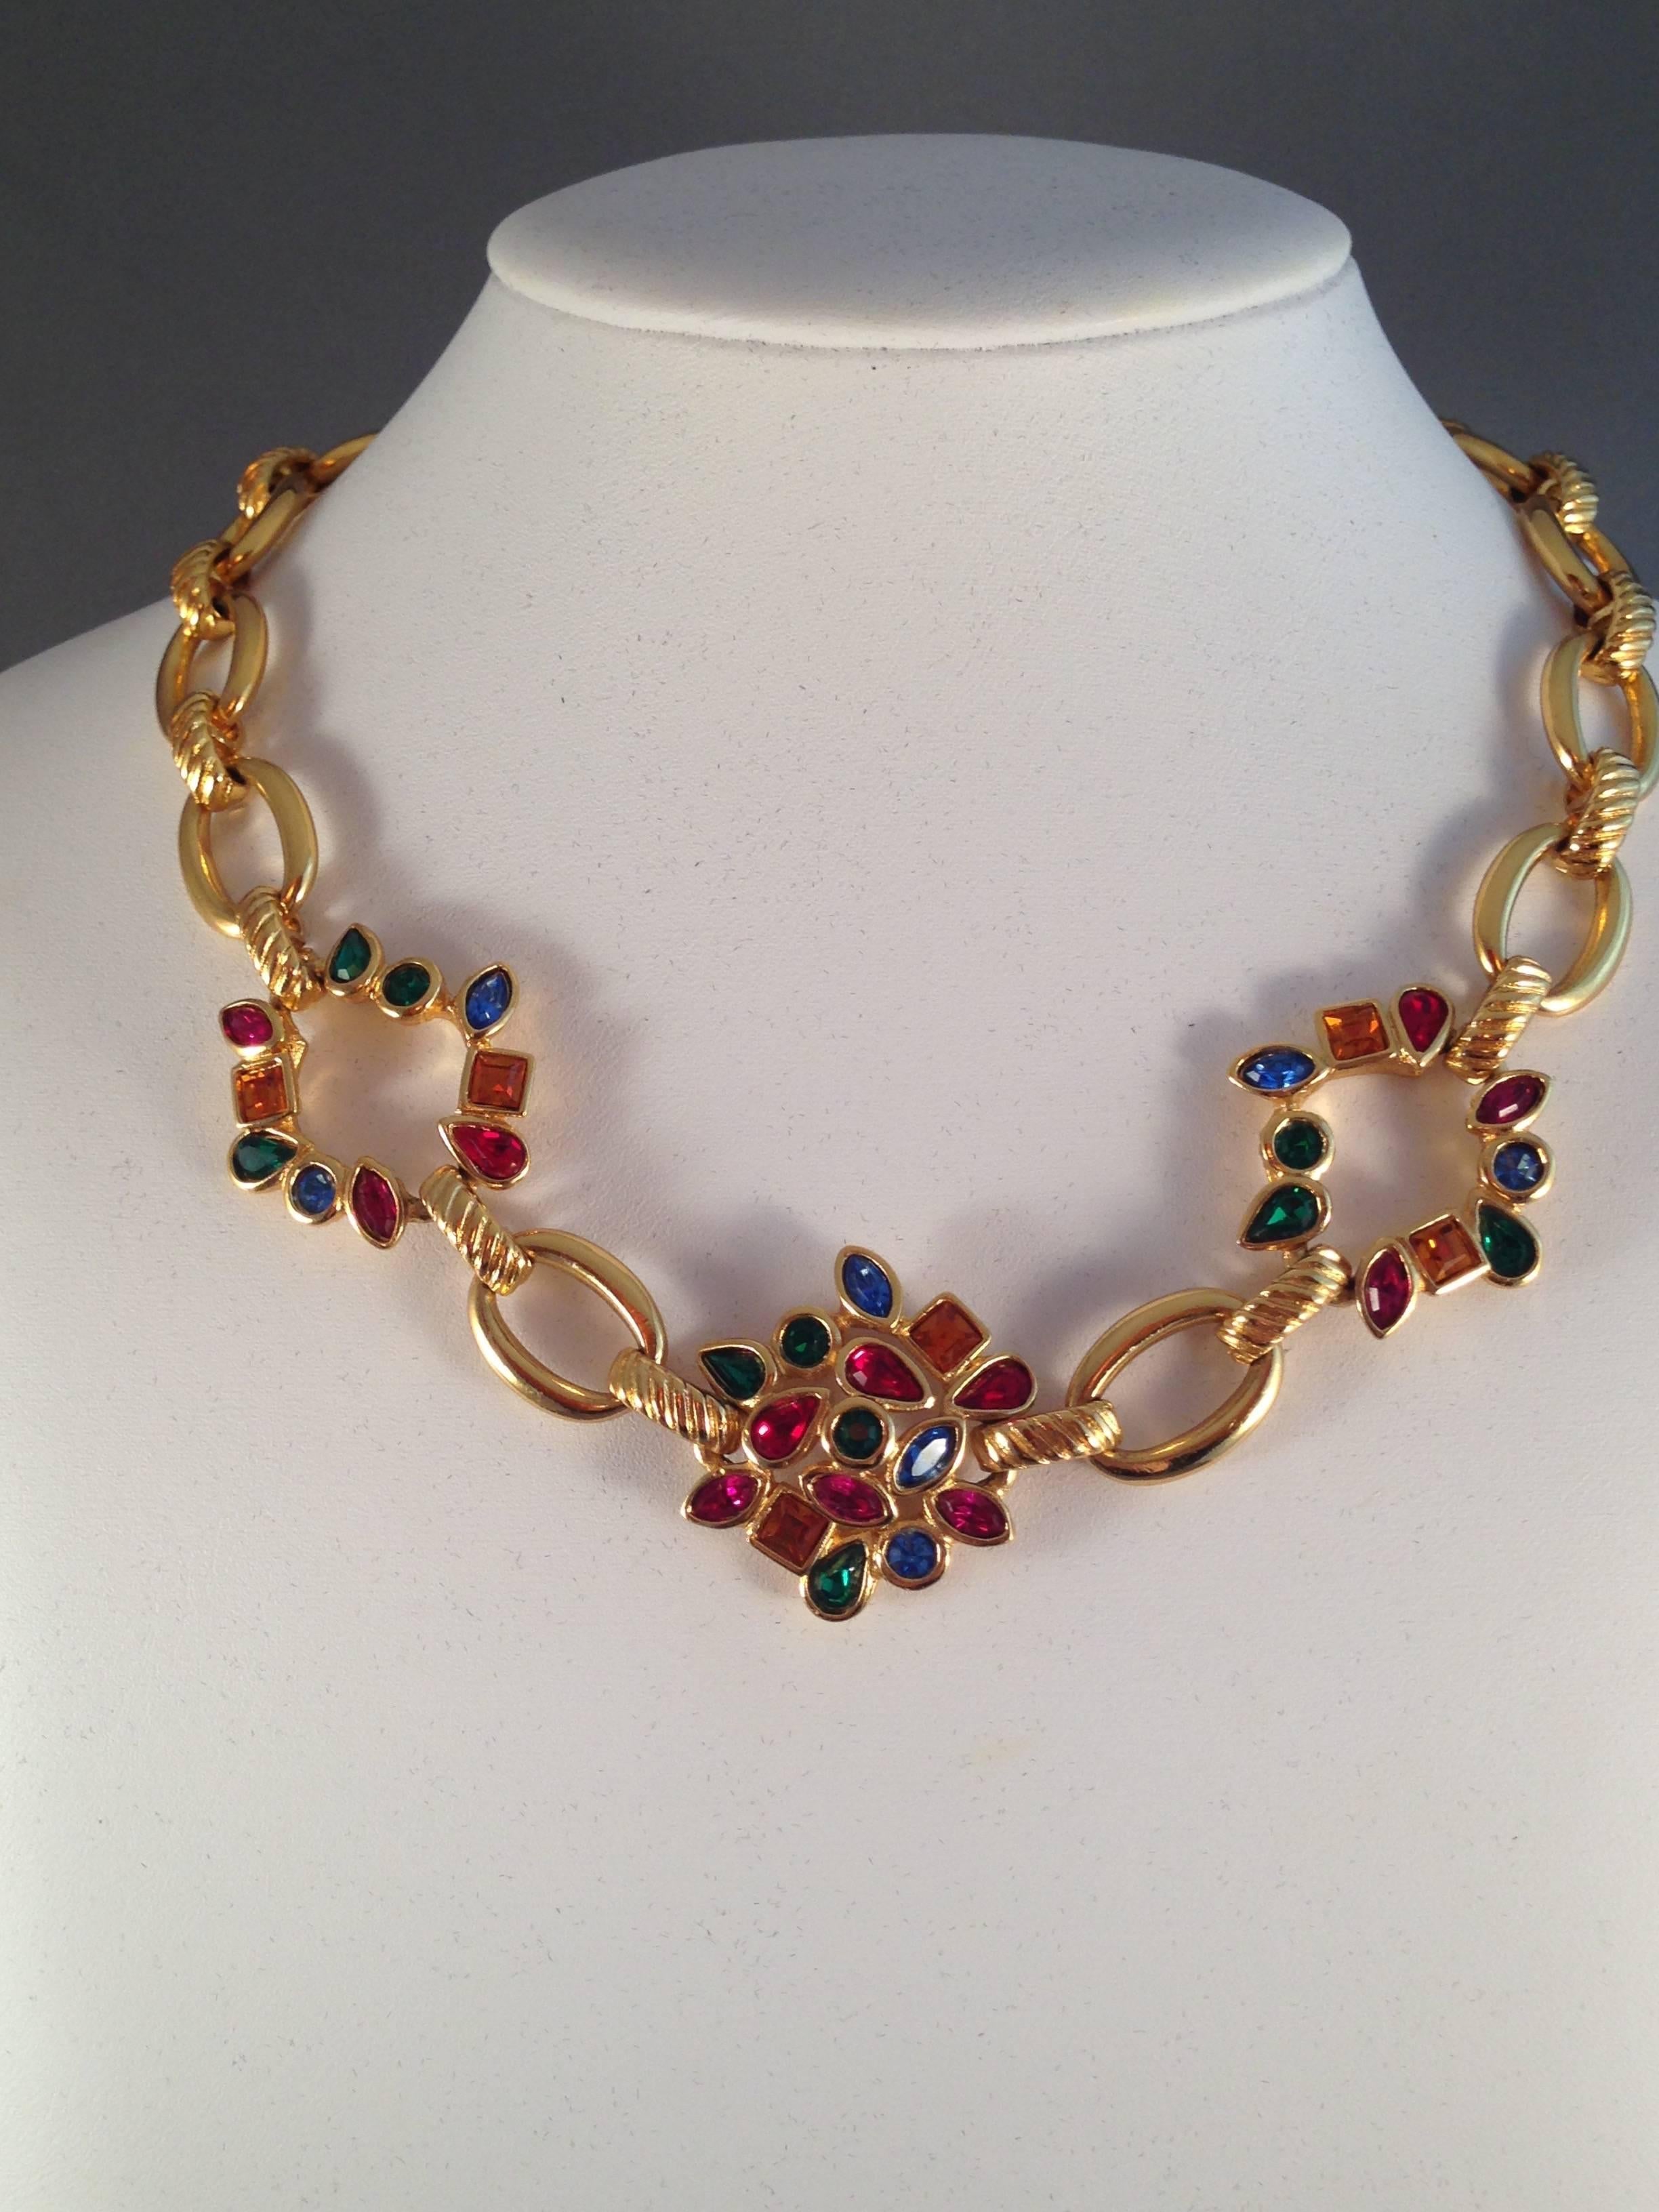 This is a 1980s Yves Saint Laurent gold-tone necklace set with beautiful, sparkling, multi-colored glass stones. It measures 17